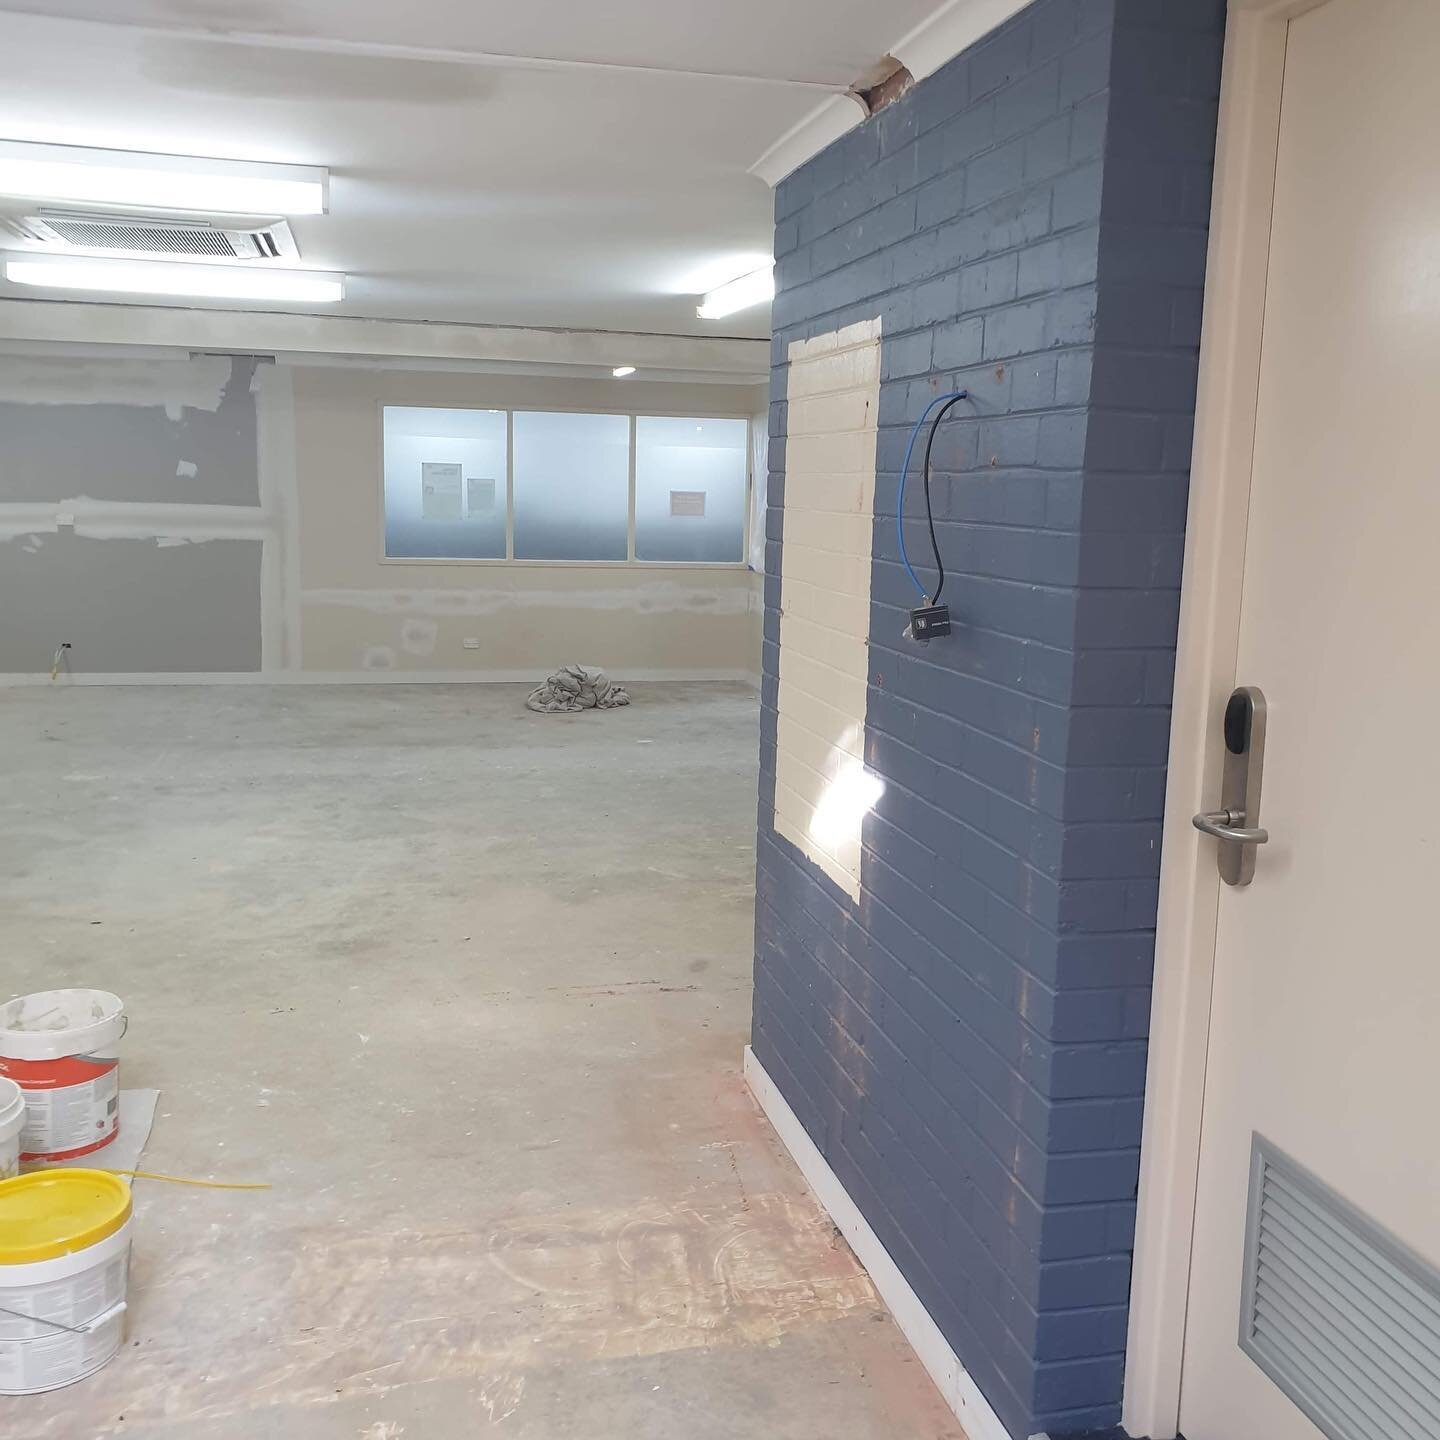 A nice little classroom conversion for @st_roberts_newtown_3220 to break up our new build projects 👌🏻⠀
⠀
⠀
#geelongpainter #geelongpainters #dulux #duluxpaint  #duluxaccredited #duluxaccreditedpainters #painteranddecorator #painteranddecorators #pa